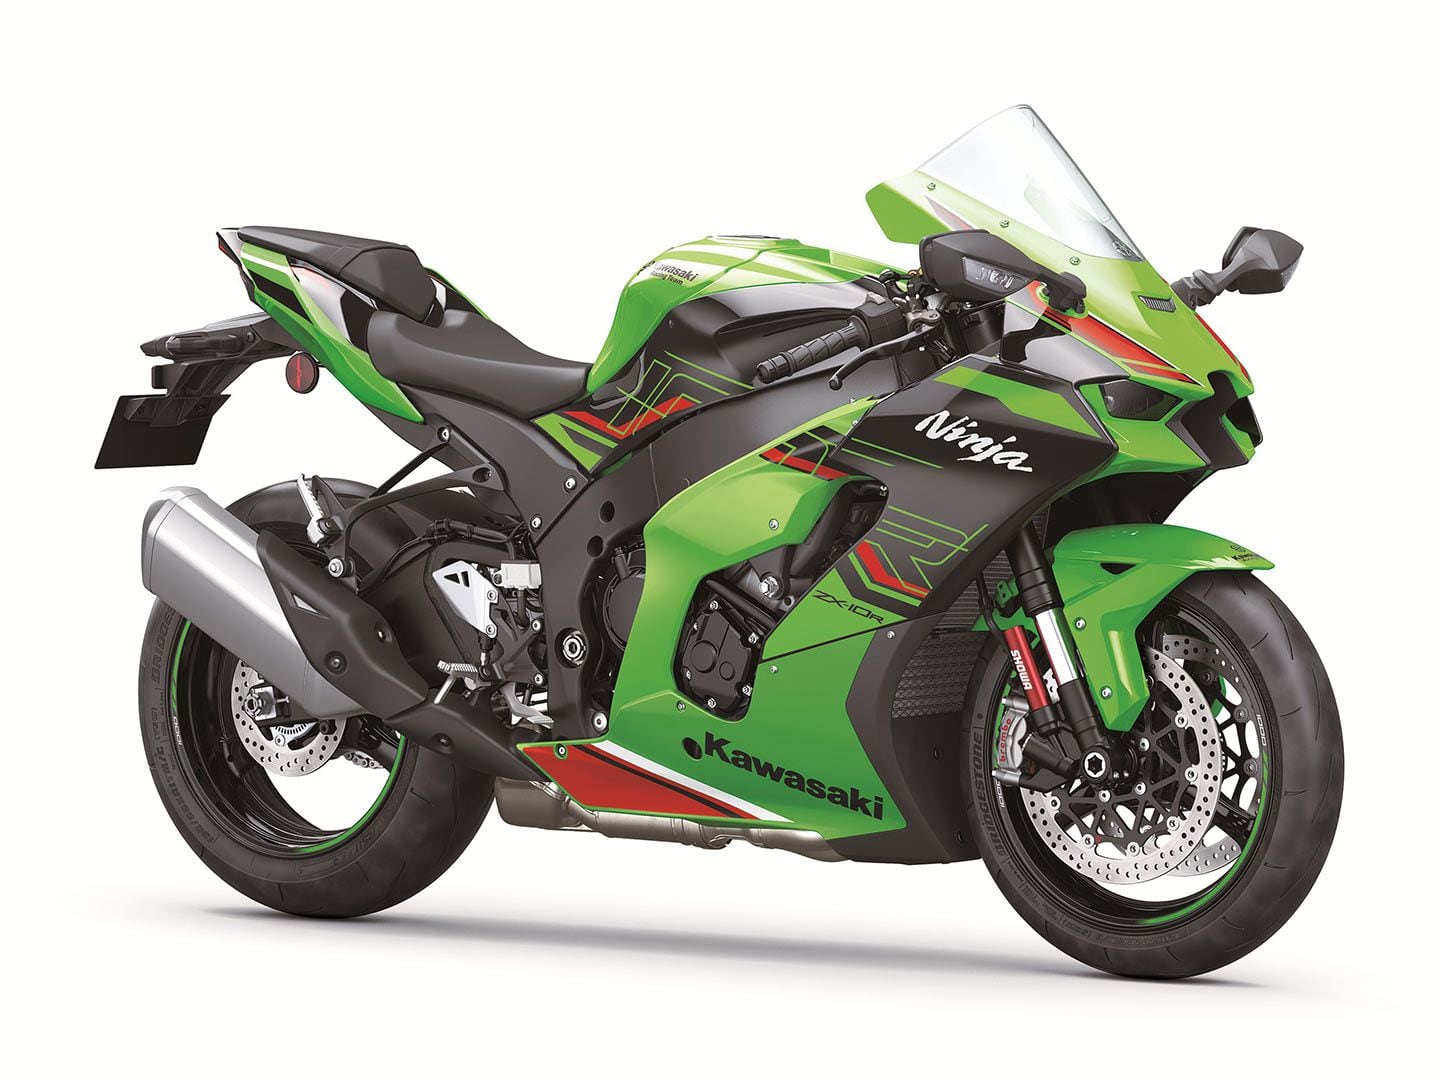 The spicier looking but mechanically unchanged ZX-10R KRT Edition is available with ABS ($18,399) or without ($17,399).